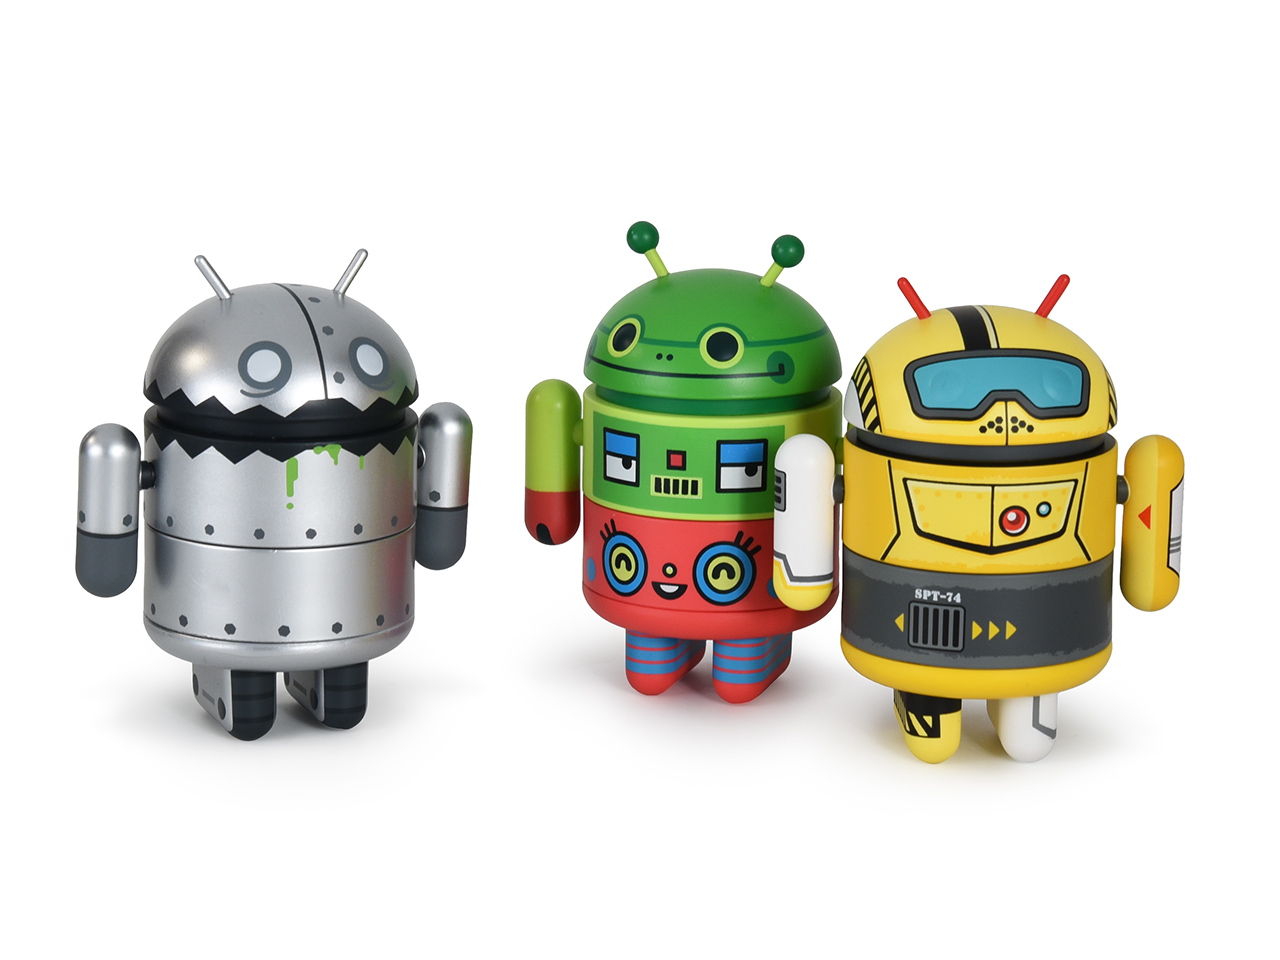 Toy android. Мини робот андроид. Андроид игрушка. Игрушка Android Collectible. Android Mini Android Reactor.